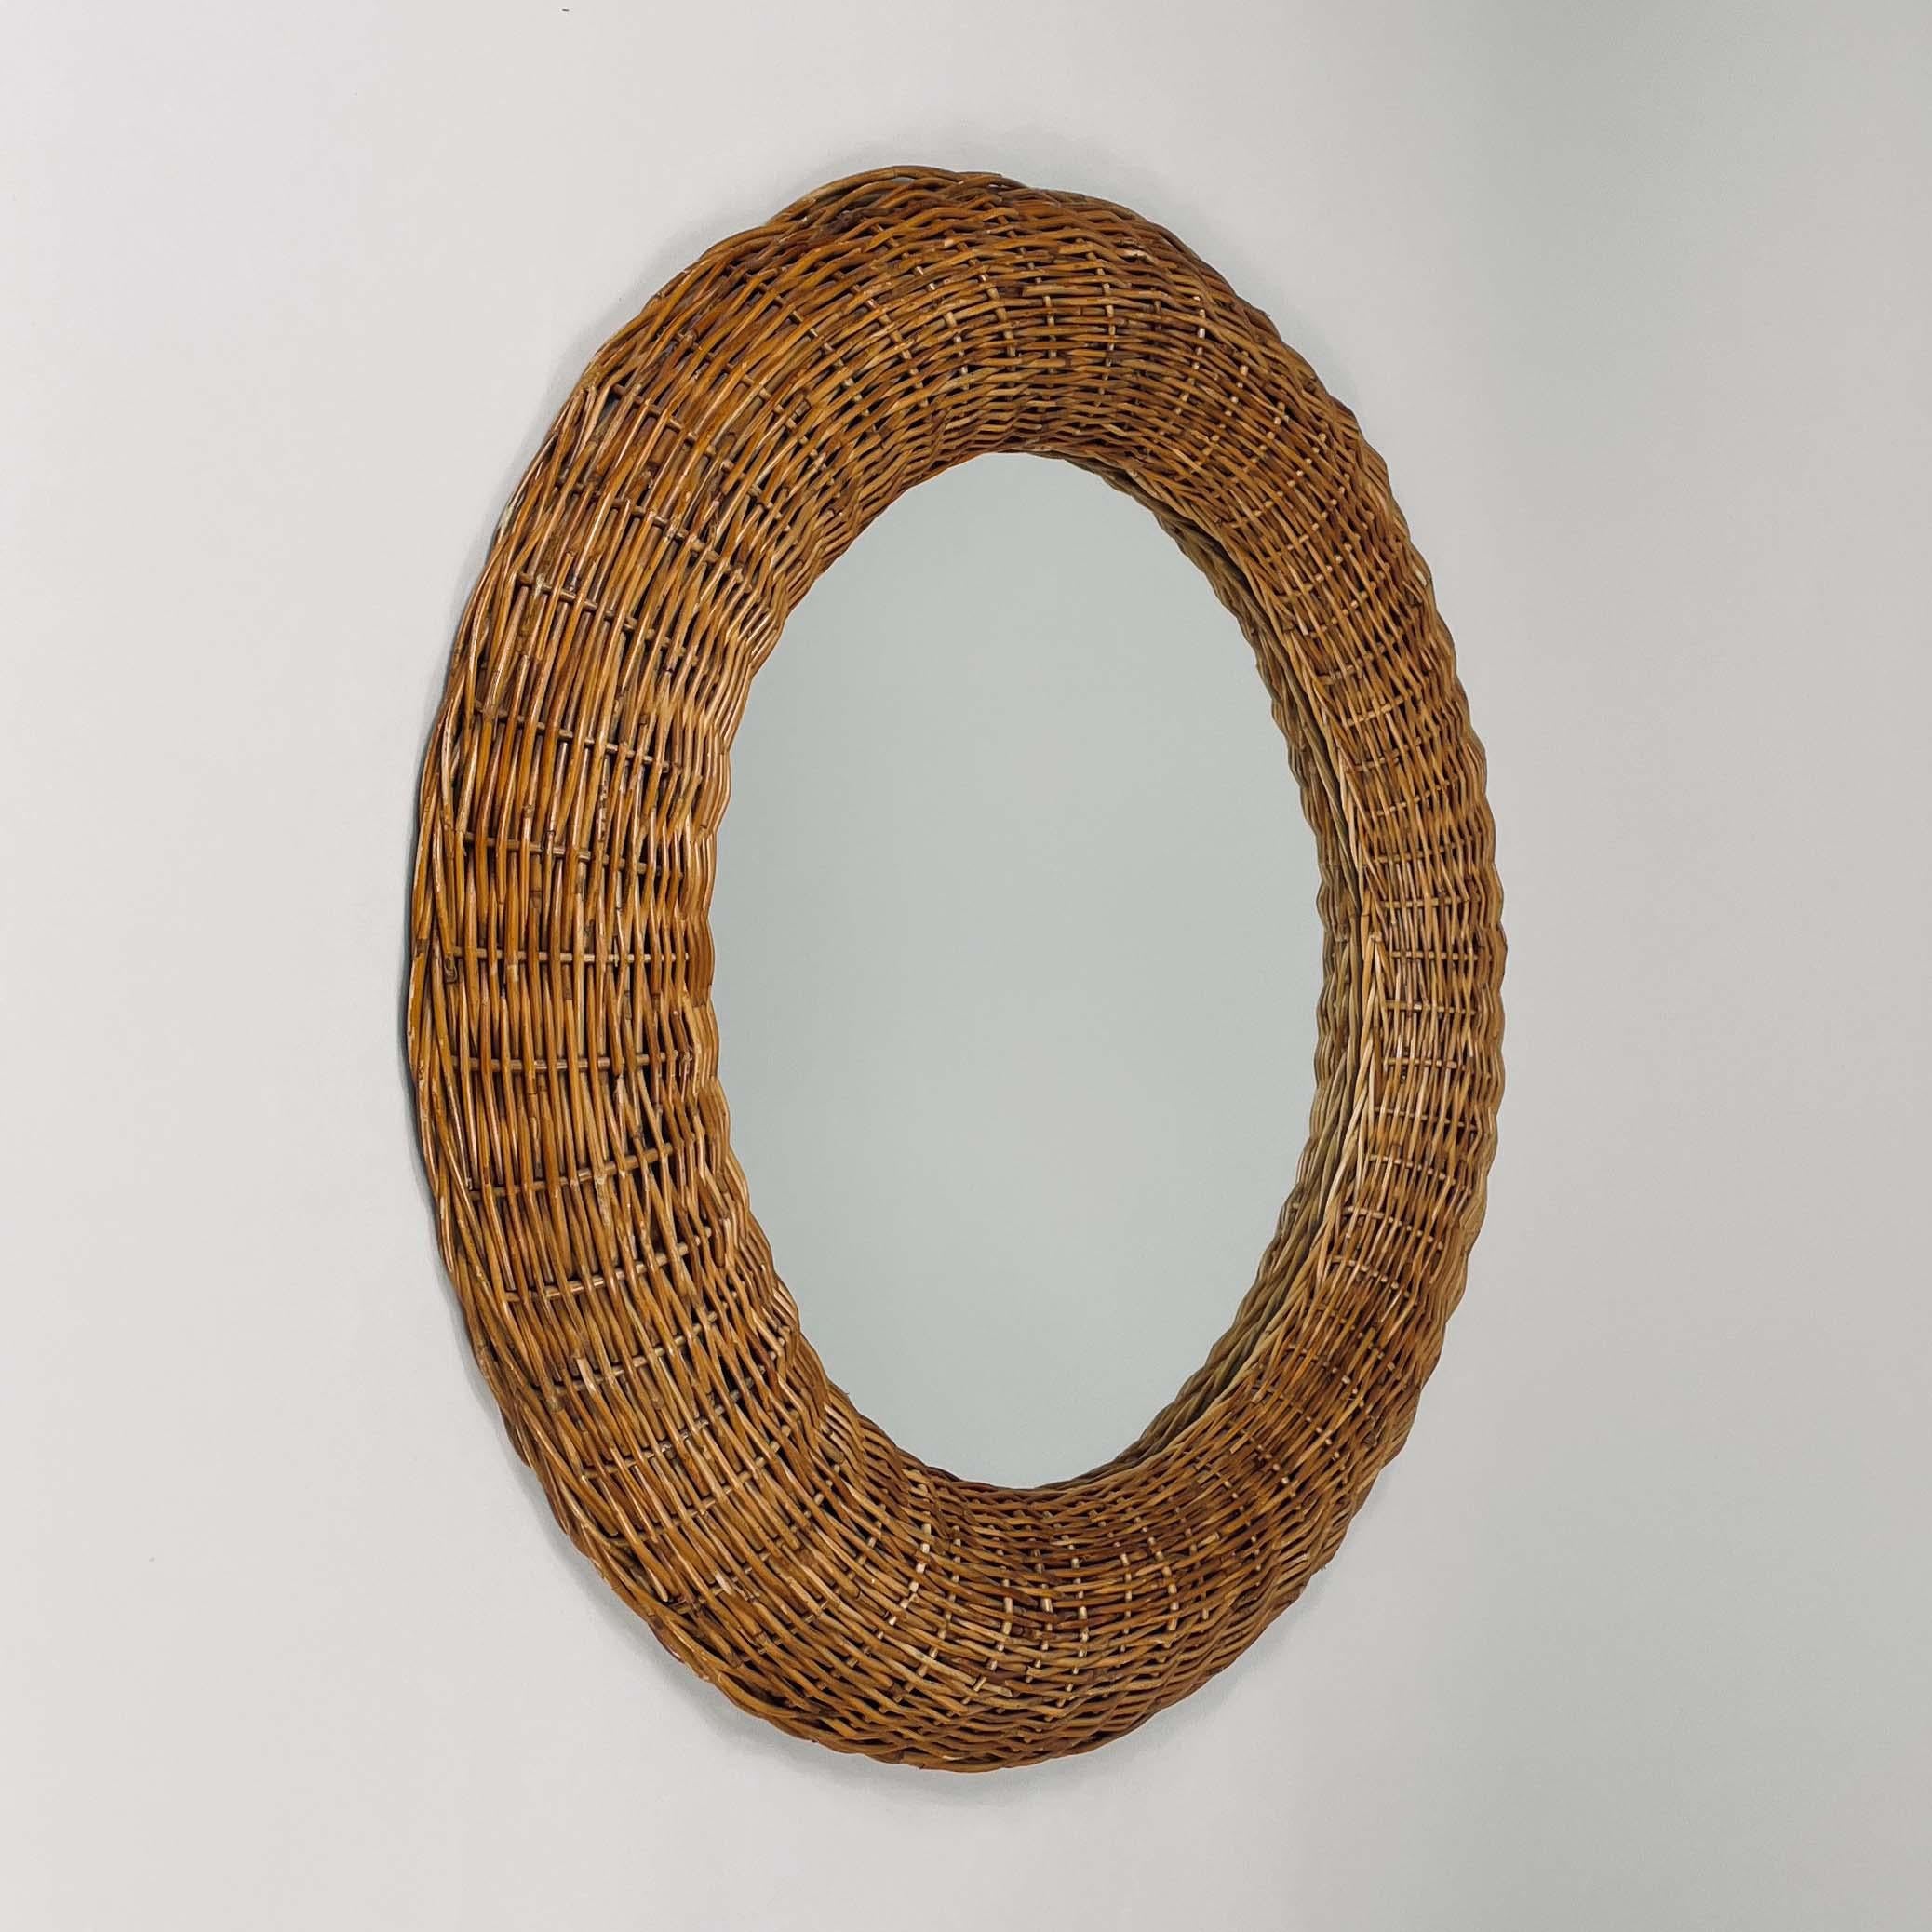 Riviera Style Round Woven Rattan Mirror, France 1950s For Sale 4